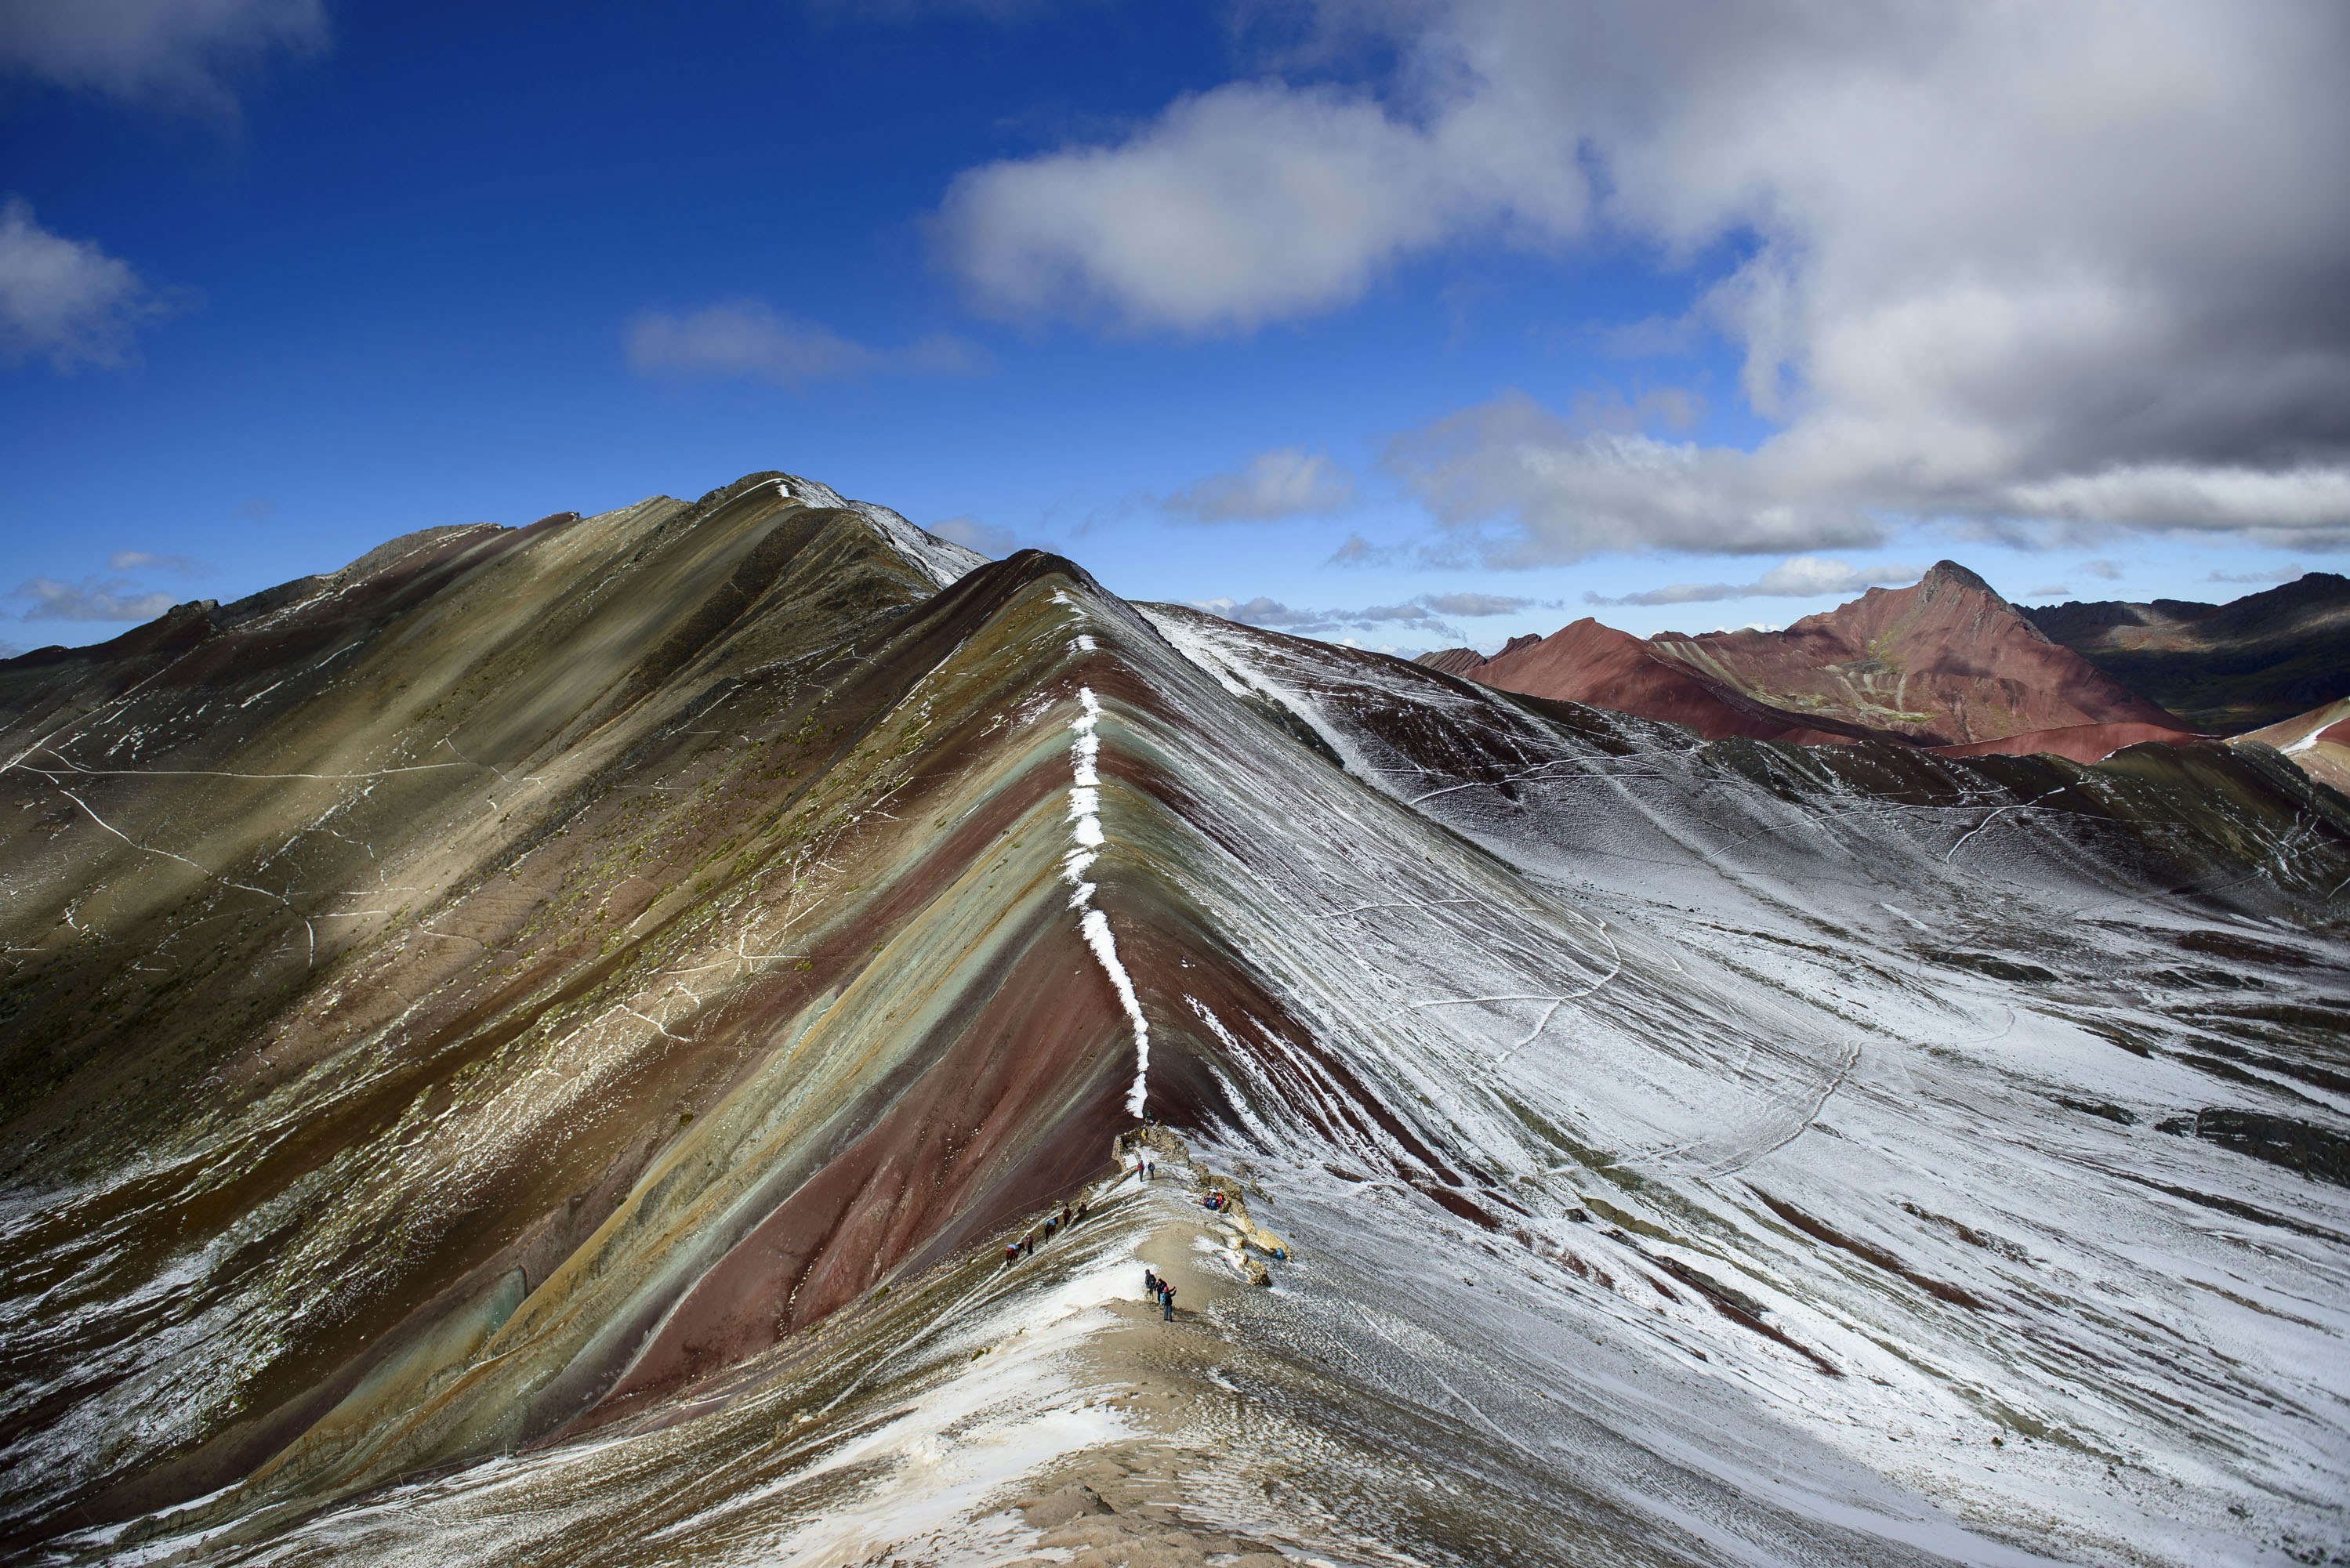 Snow slowly melts away to reveal the multi-color terrain of the Rainbow Mountains in Peru 